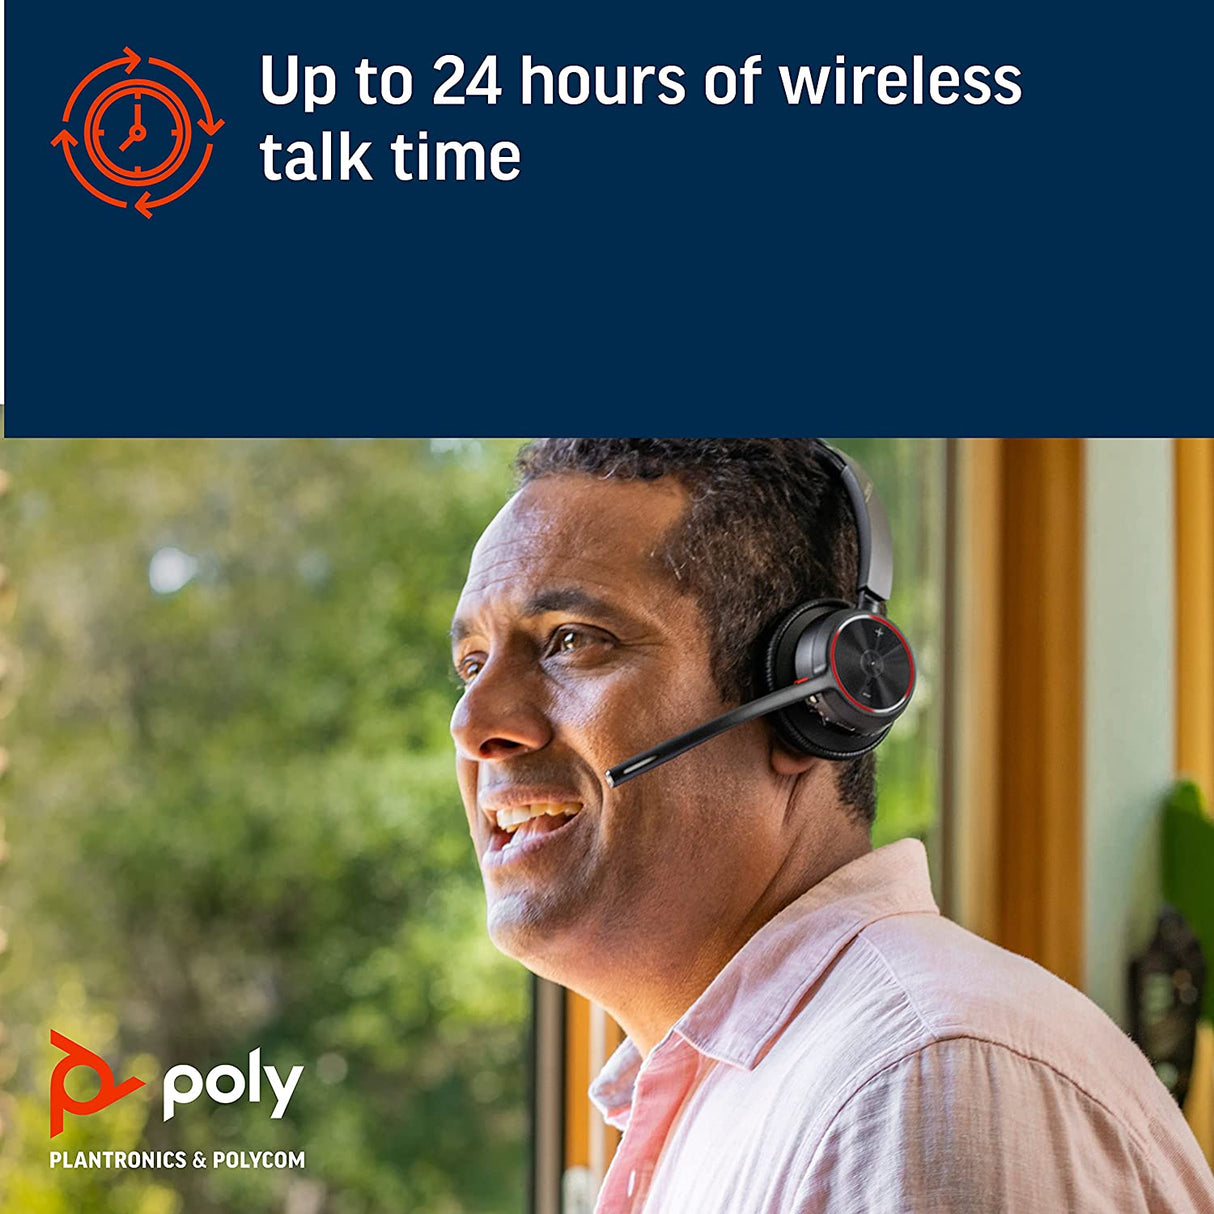 Poly - Voyager 4310 UC Wireless Headset + Charge Stand (Plantronics) - Single-Ear Headset- Connect to PC/Mac via USB-A Bluetooth Adapter, Cell Phone via Bluetooth-Works w/ Teams (Certified), Zoom&amp;More Headset + Charge Stand USB-A